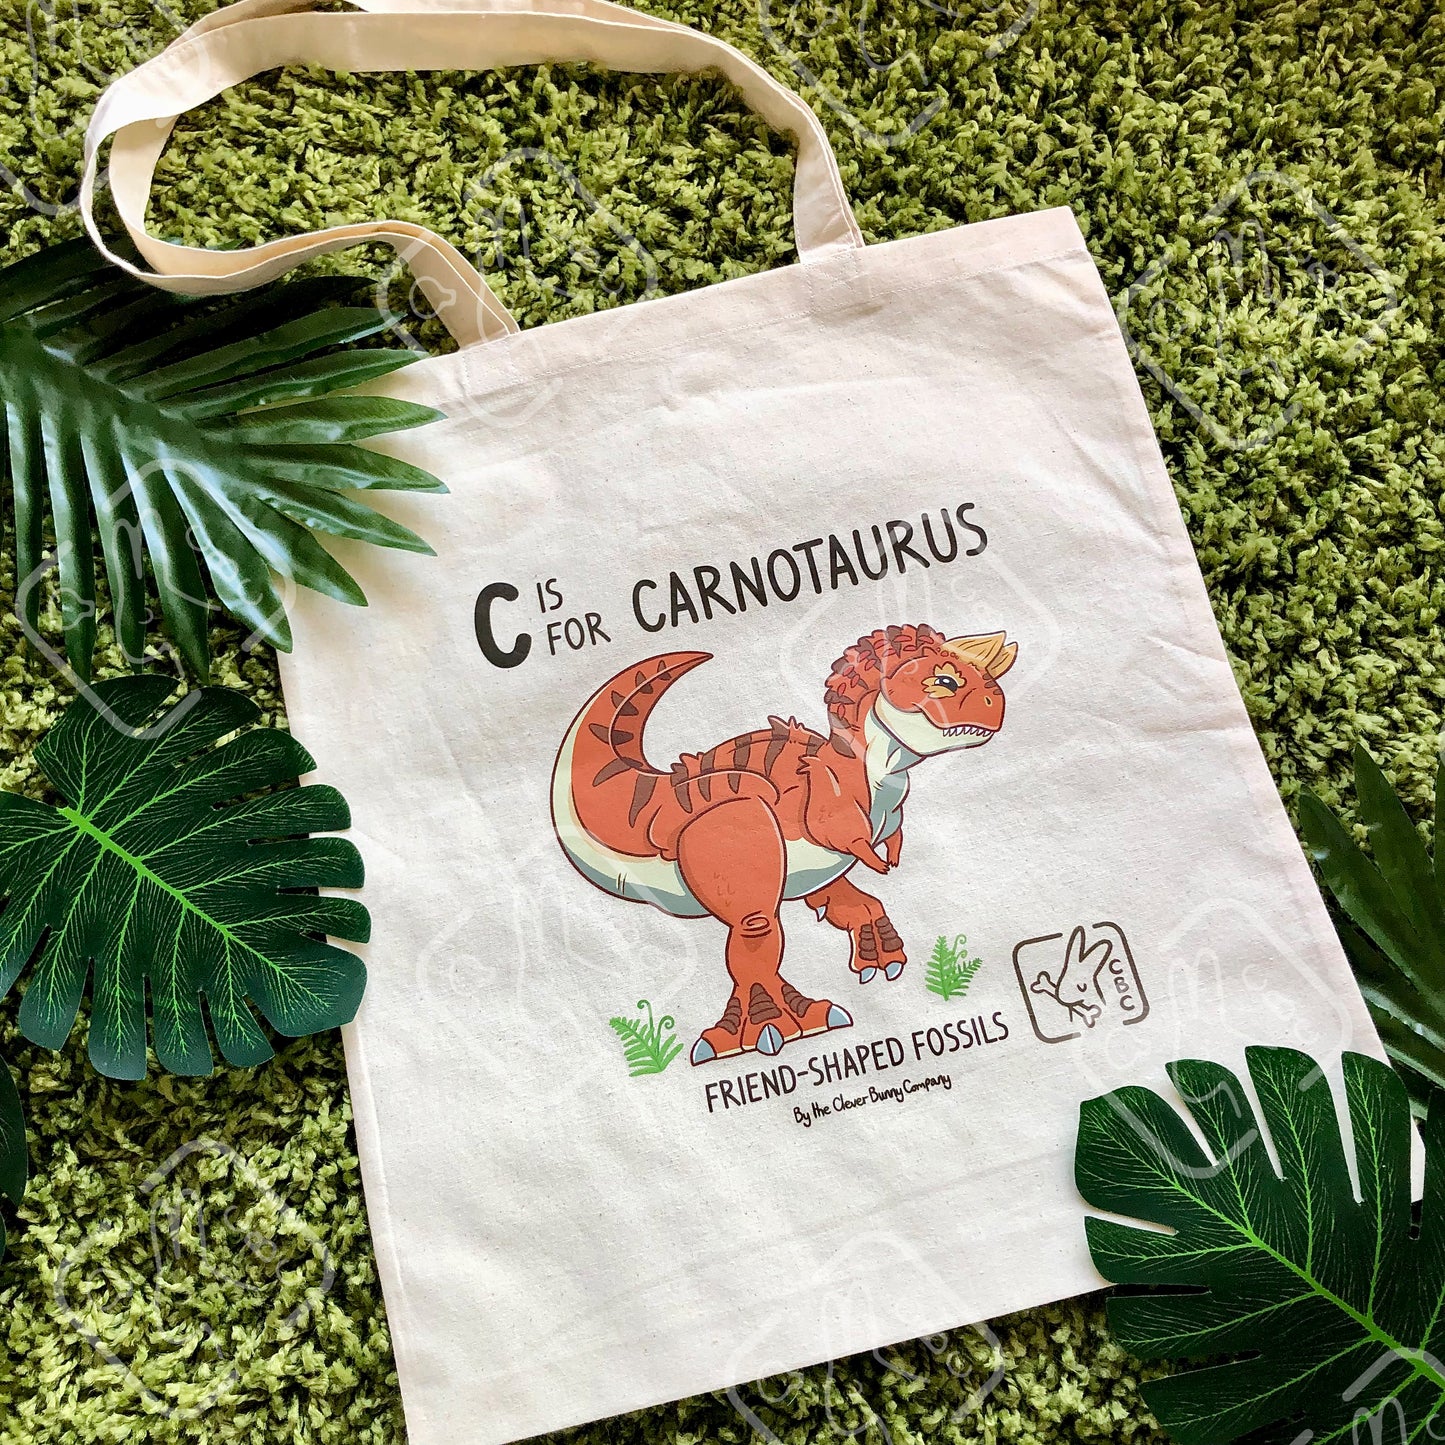 A tote bag featuring an orange Carnotaurus  dinosaur. Text reads "C is for Carnotaurus" and "Friend-shaped Fossils by the Clever Bunny Company."